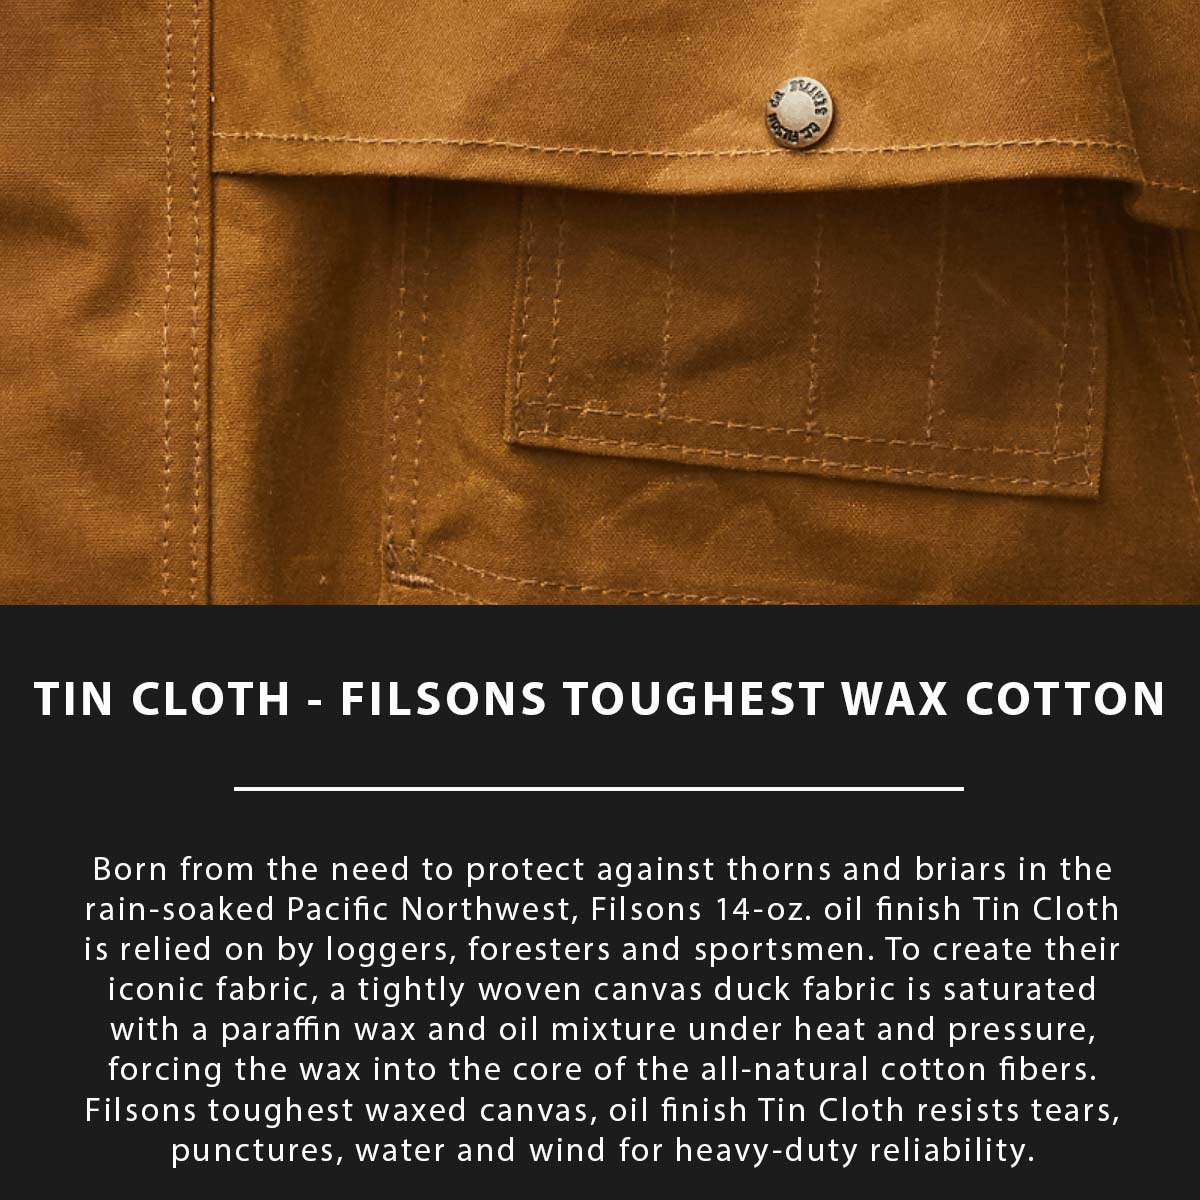 Filson Tin Cloth Field Jacket, made of the legendary super strong, lightweight, and oil impregnated 14-oz. Tin Cloth canvas